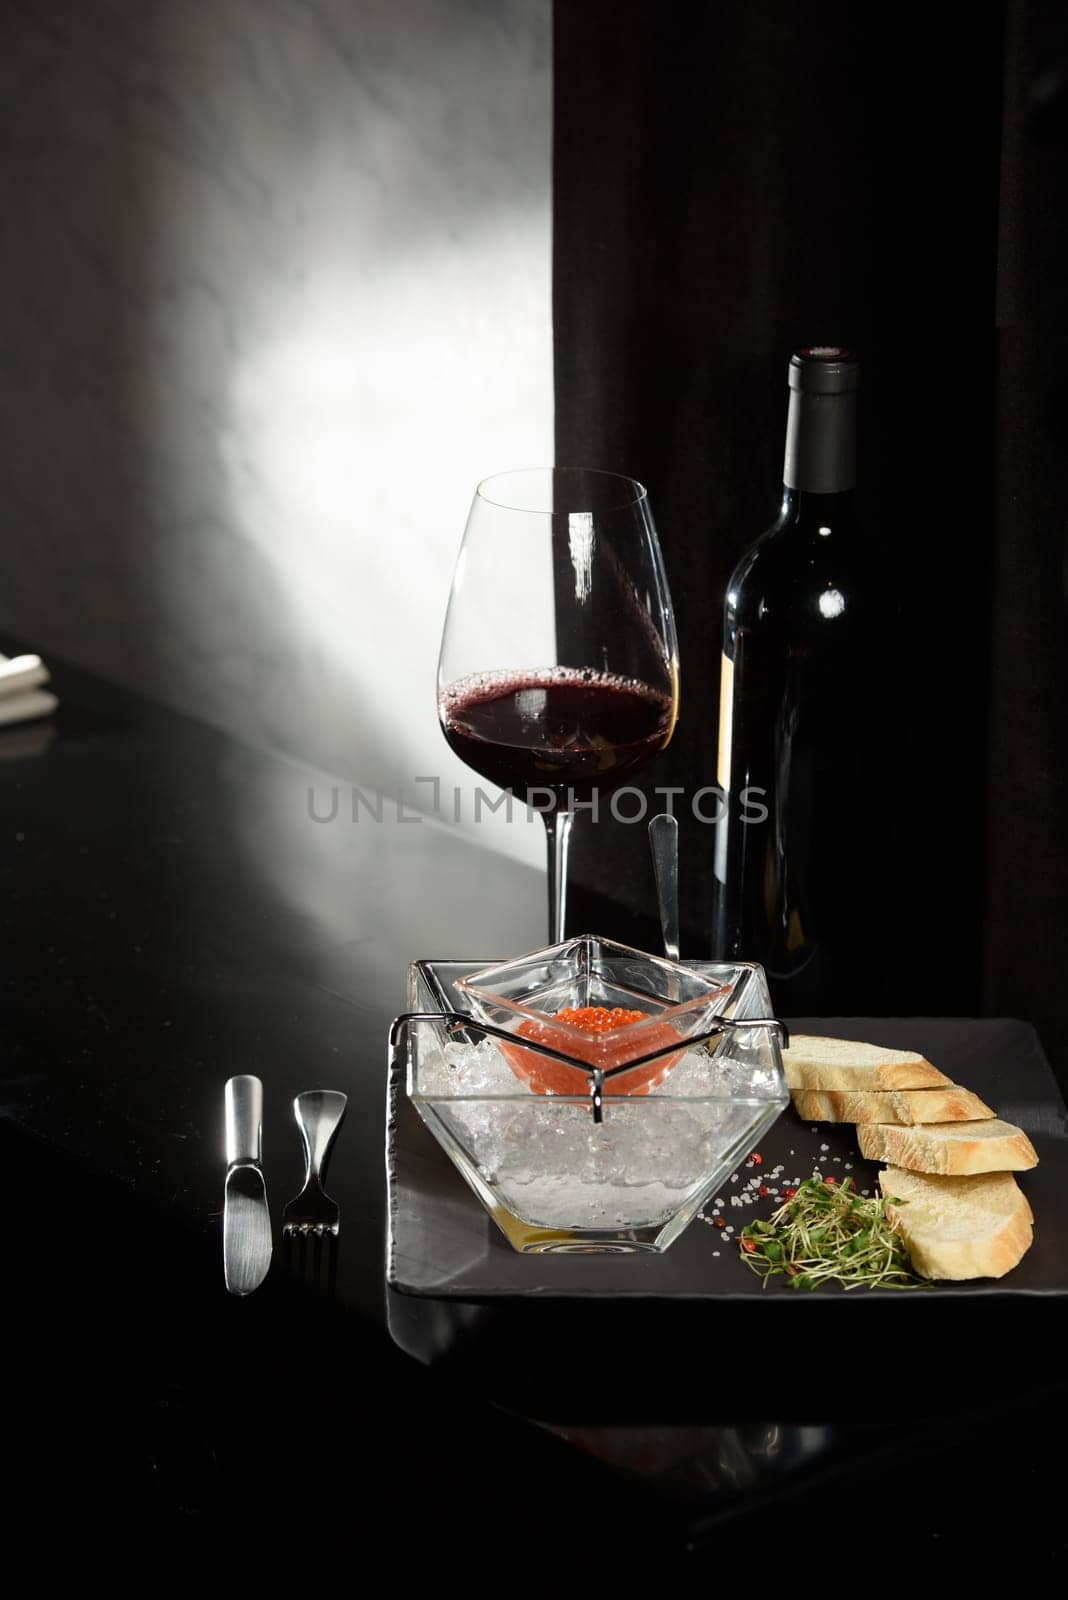 salmon fish caviar, on ice, with croutons, lemon, on a transparent dish, on a dark background by Ashtray25